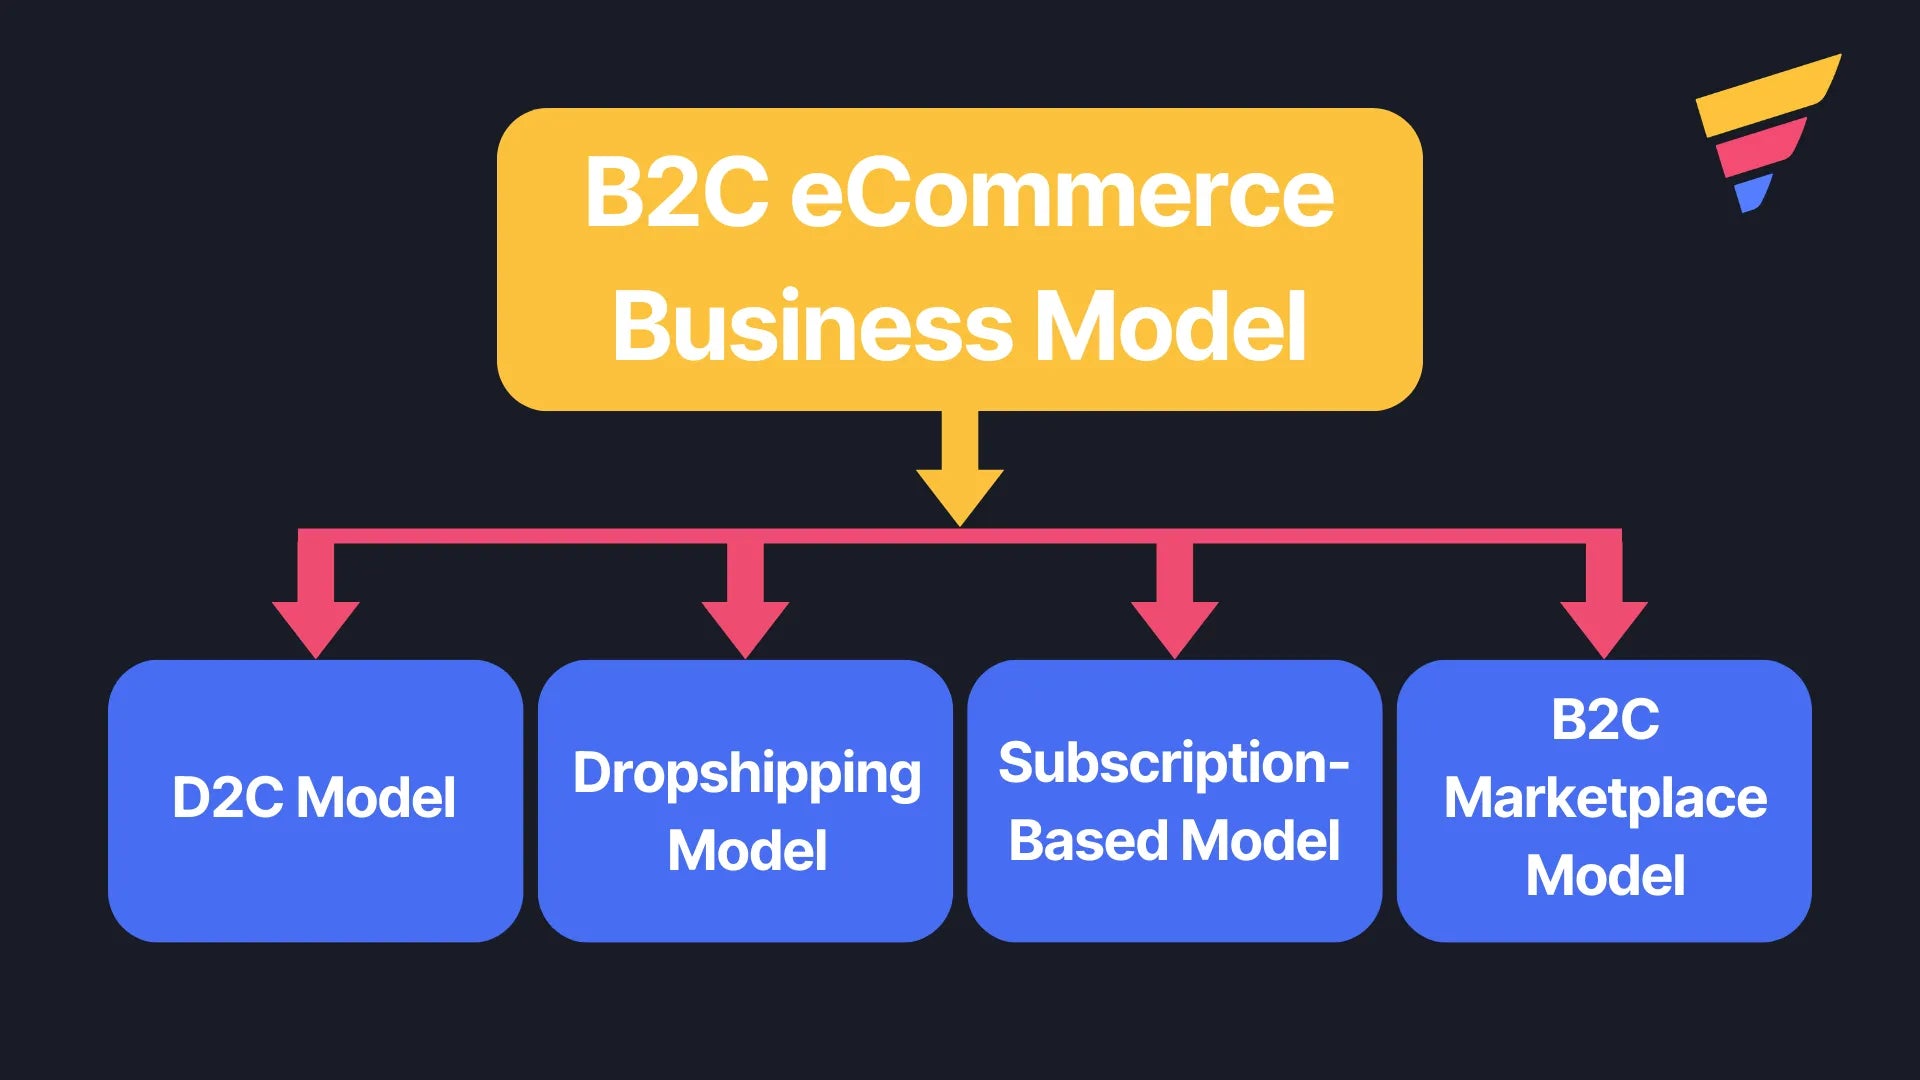 B2C eCommerce business model with its sub-business-models